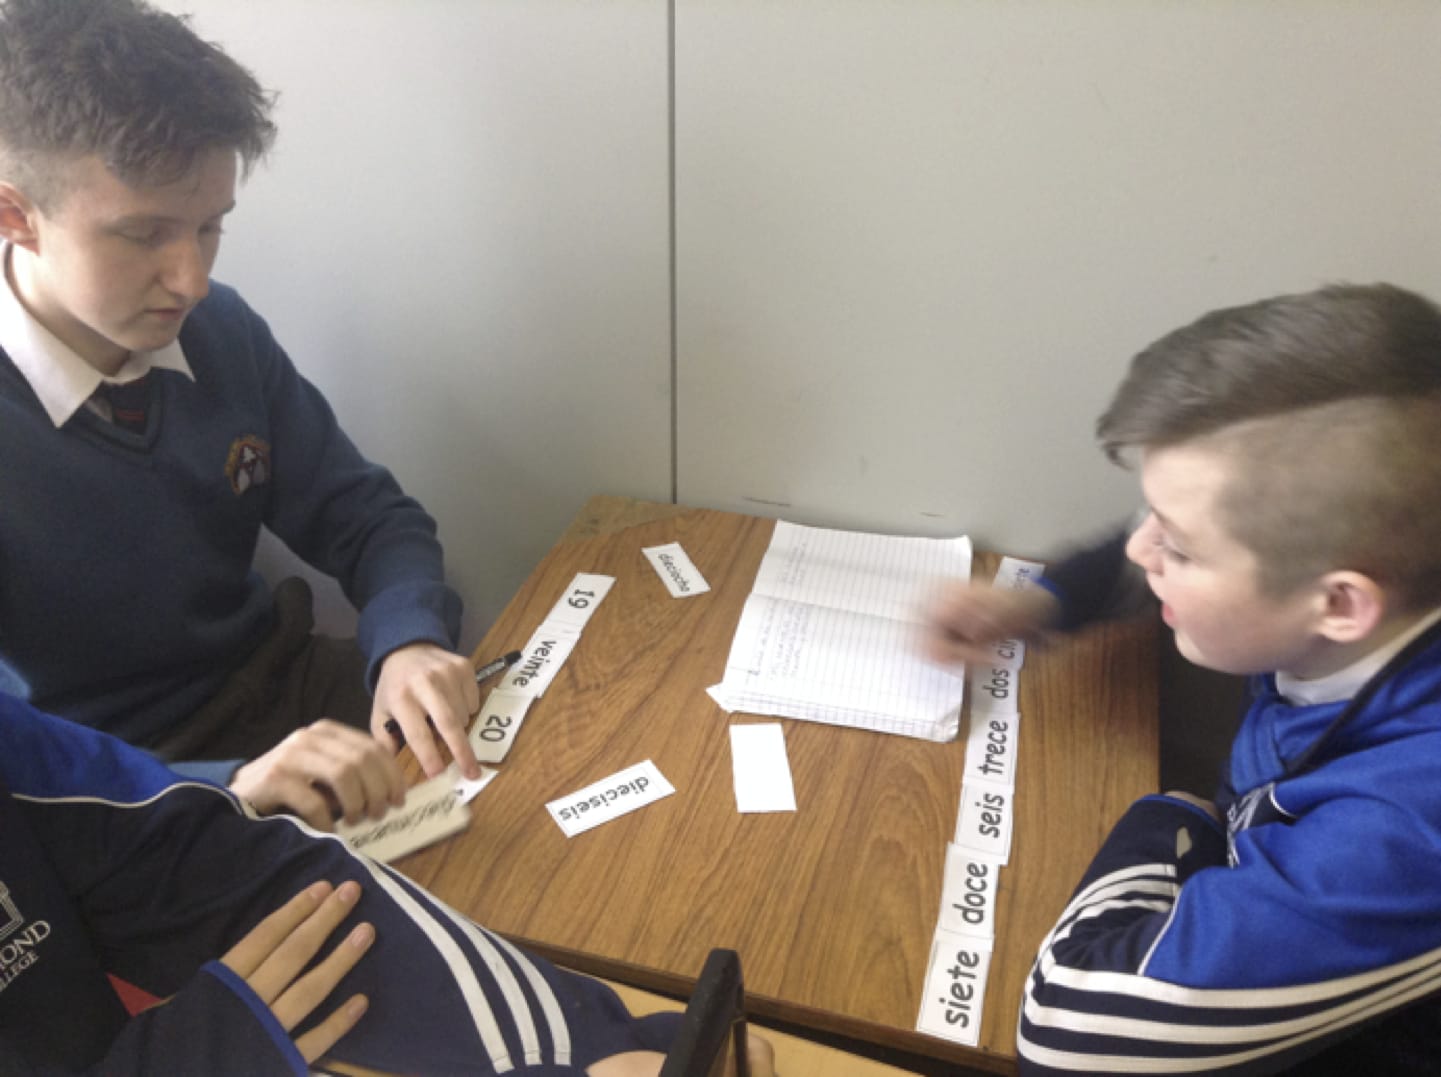 Feb 2017: Desmond College Students taking part in Numeracy activities as part of numeracy week